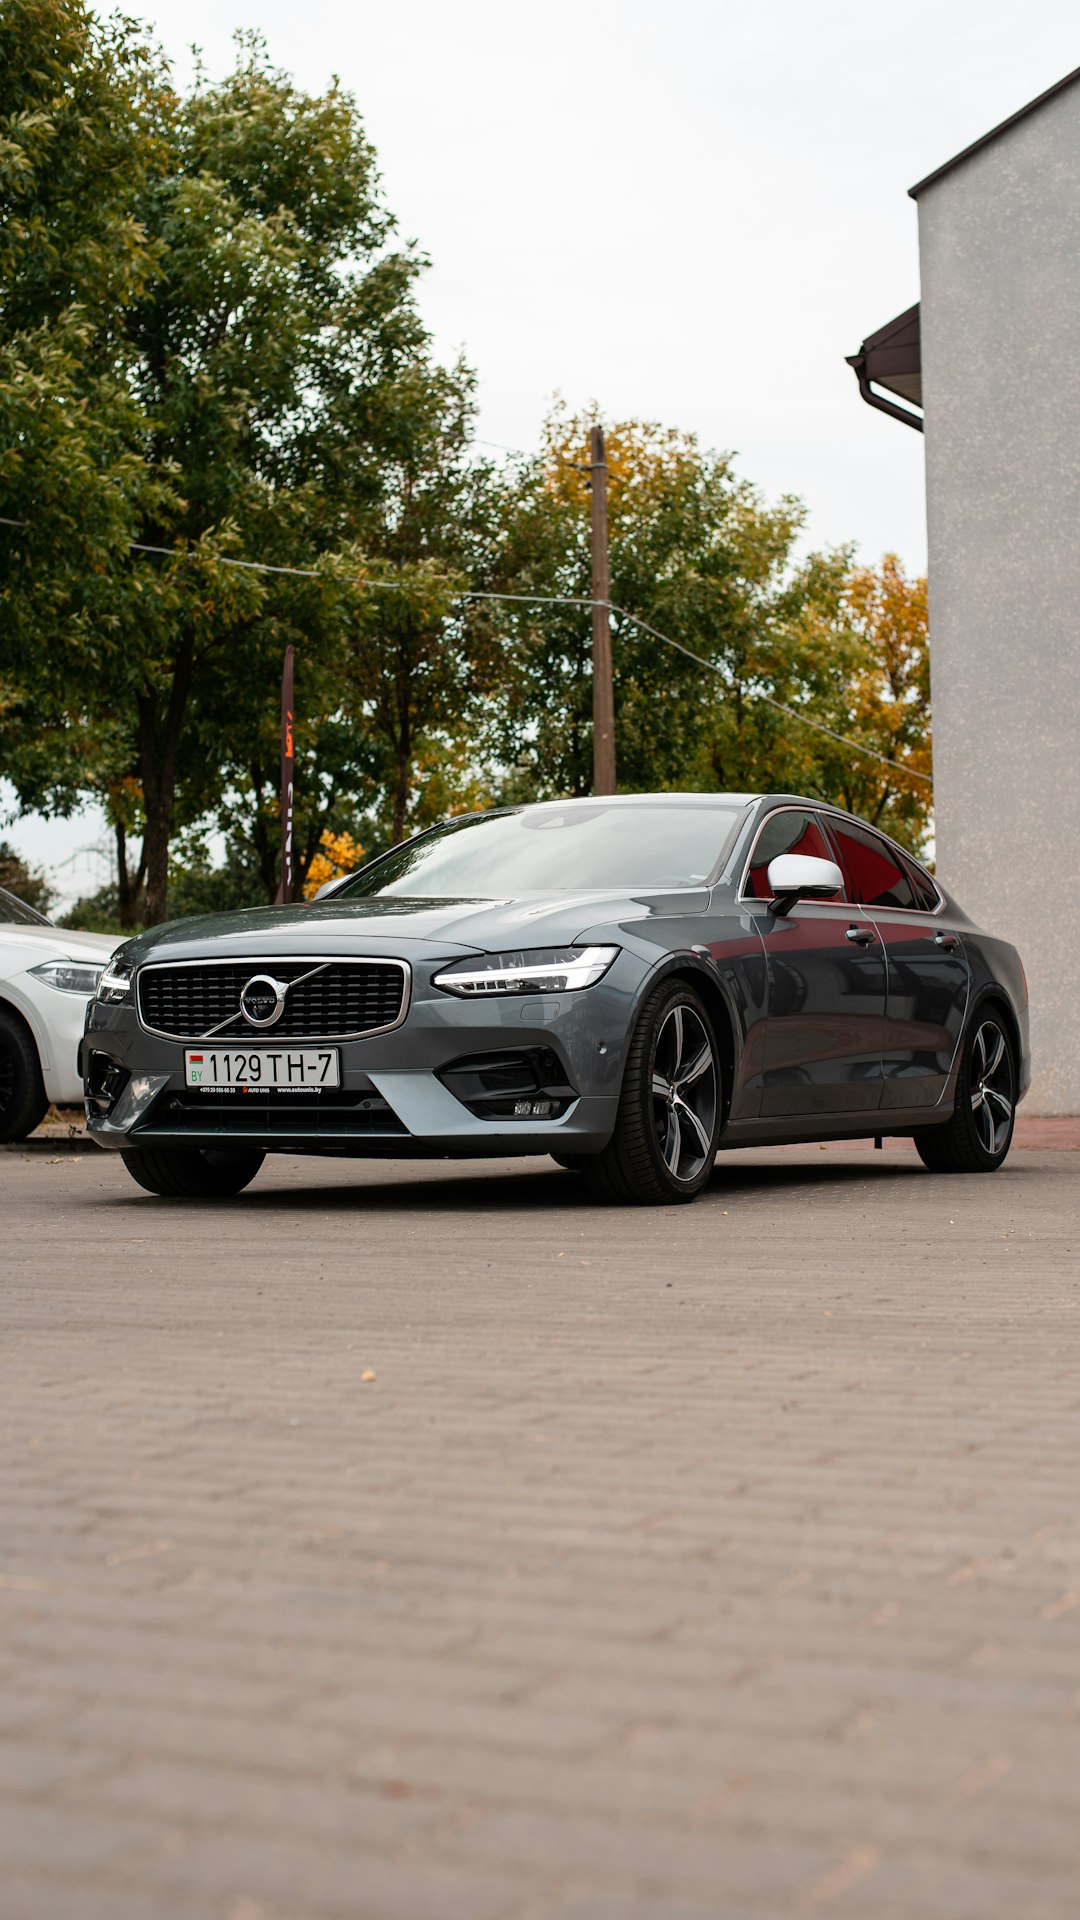 The Volvo XC40 is a stylish and luxurious compact SUV that combines innovative technology with exceptional performance for a premium driving experience.